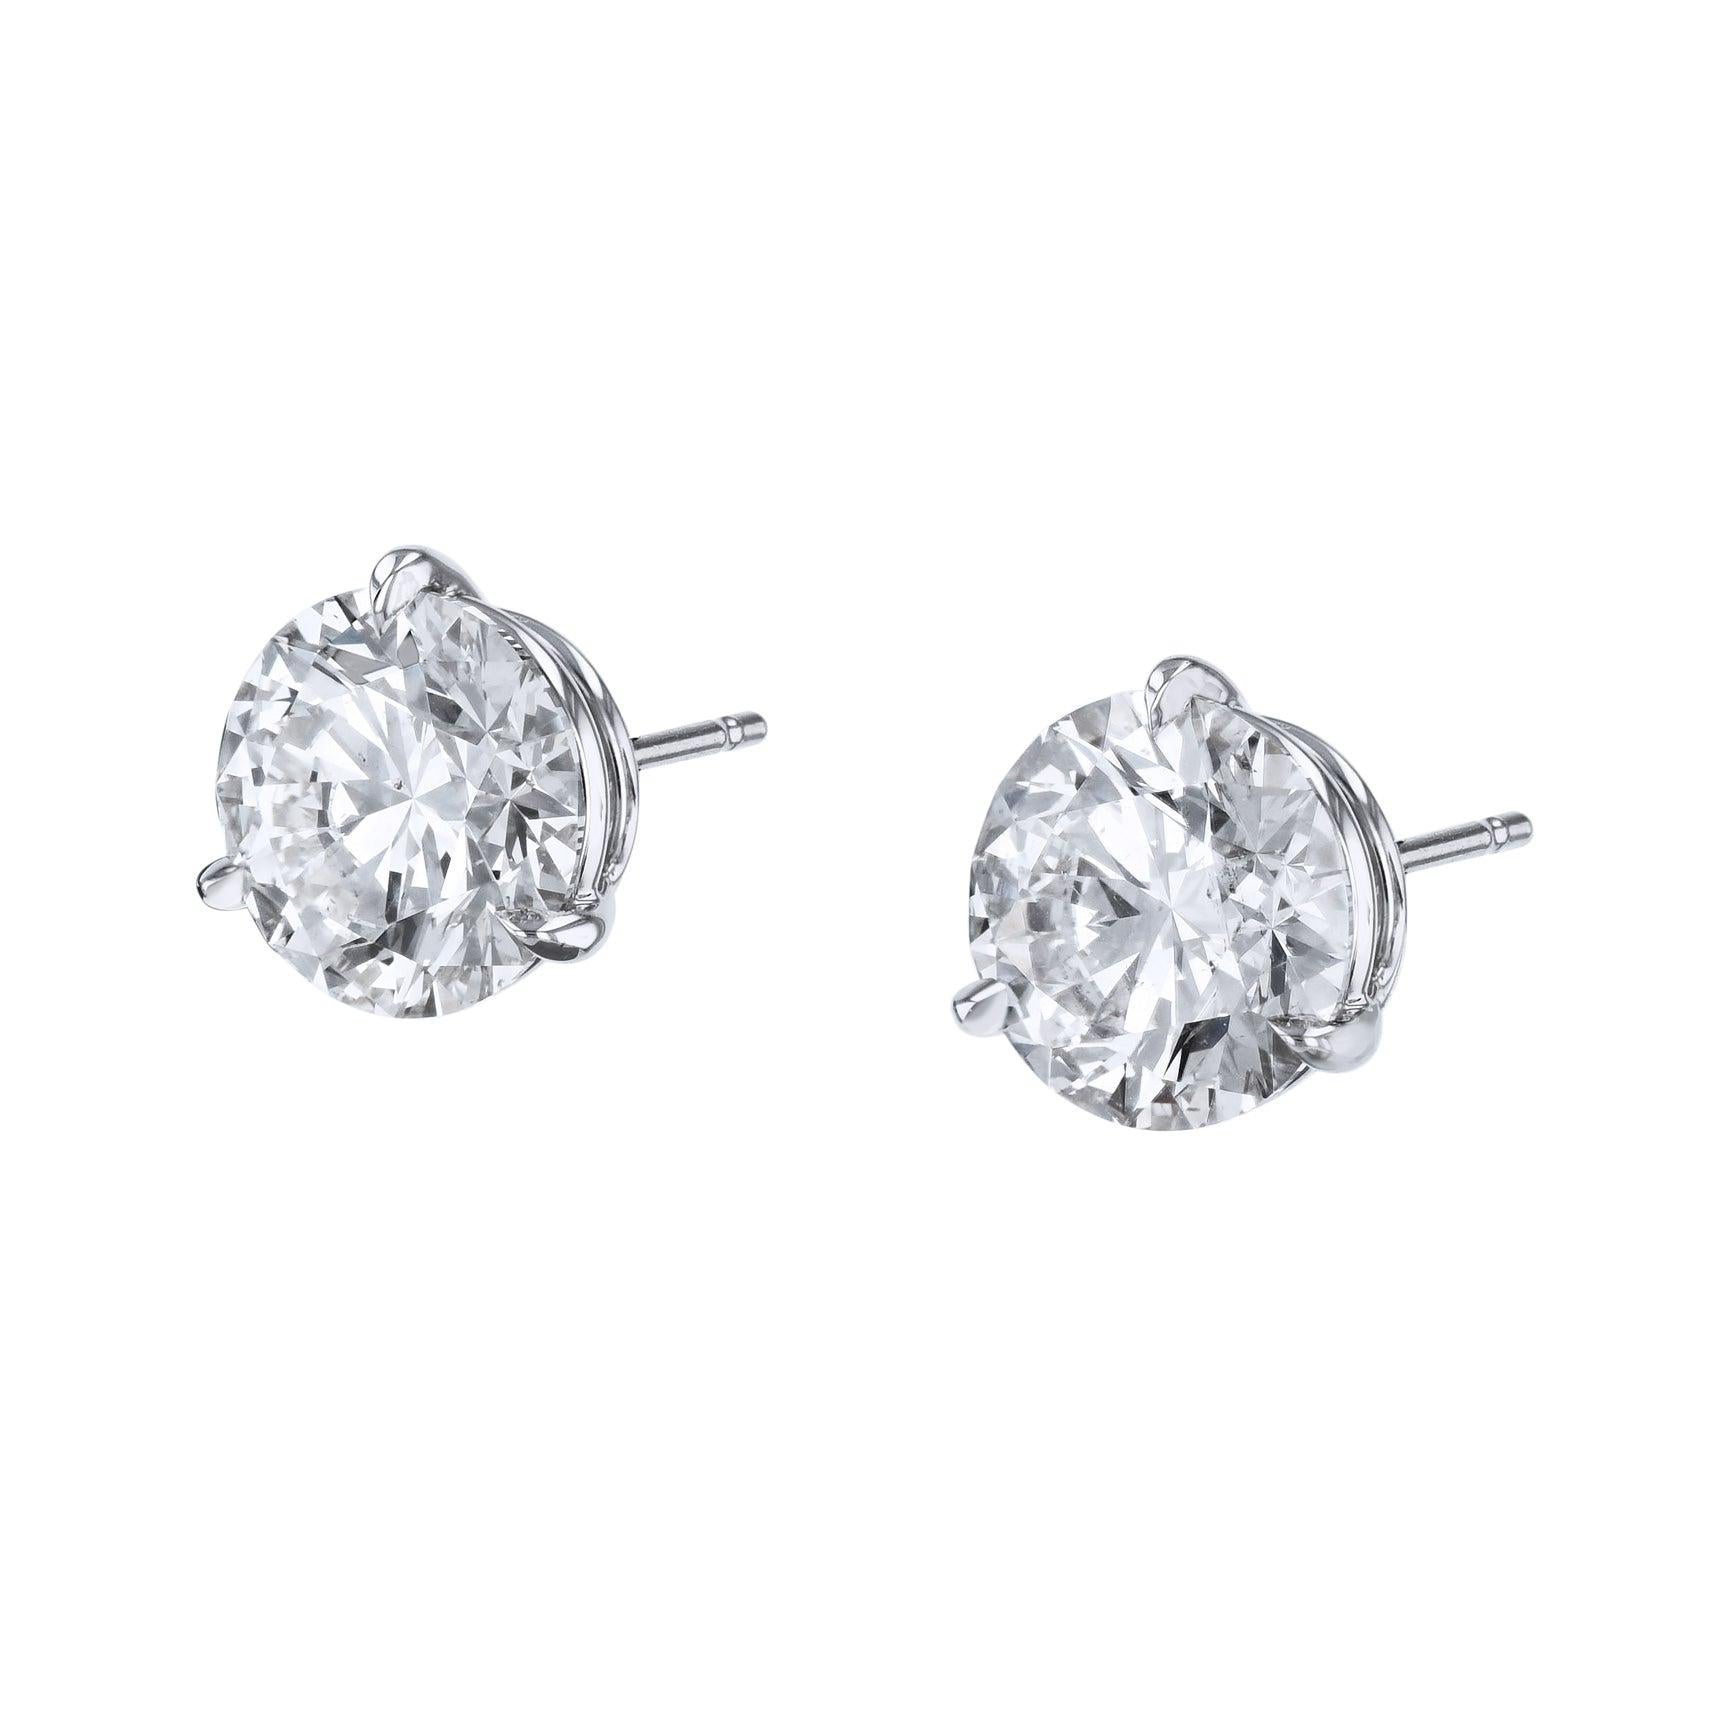 Adorn your ears with these amazing 10.08 carat Total Weight Diamond Stud Earrings.
The color is I & J with SI1 clarity ( EX,EX,EX).

10.08ct Total Weight    I & J SI2 ( EX,EX,EX)  Diamonds.

Earring one is 5.06ct I-SI2 (EX,EX,EX).
G.I.A.